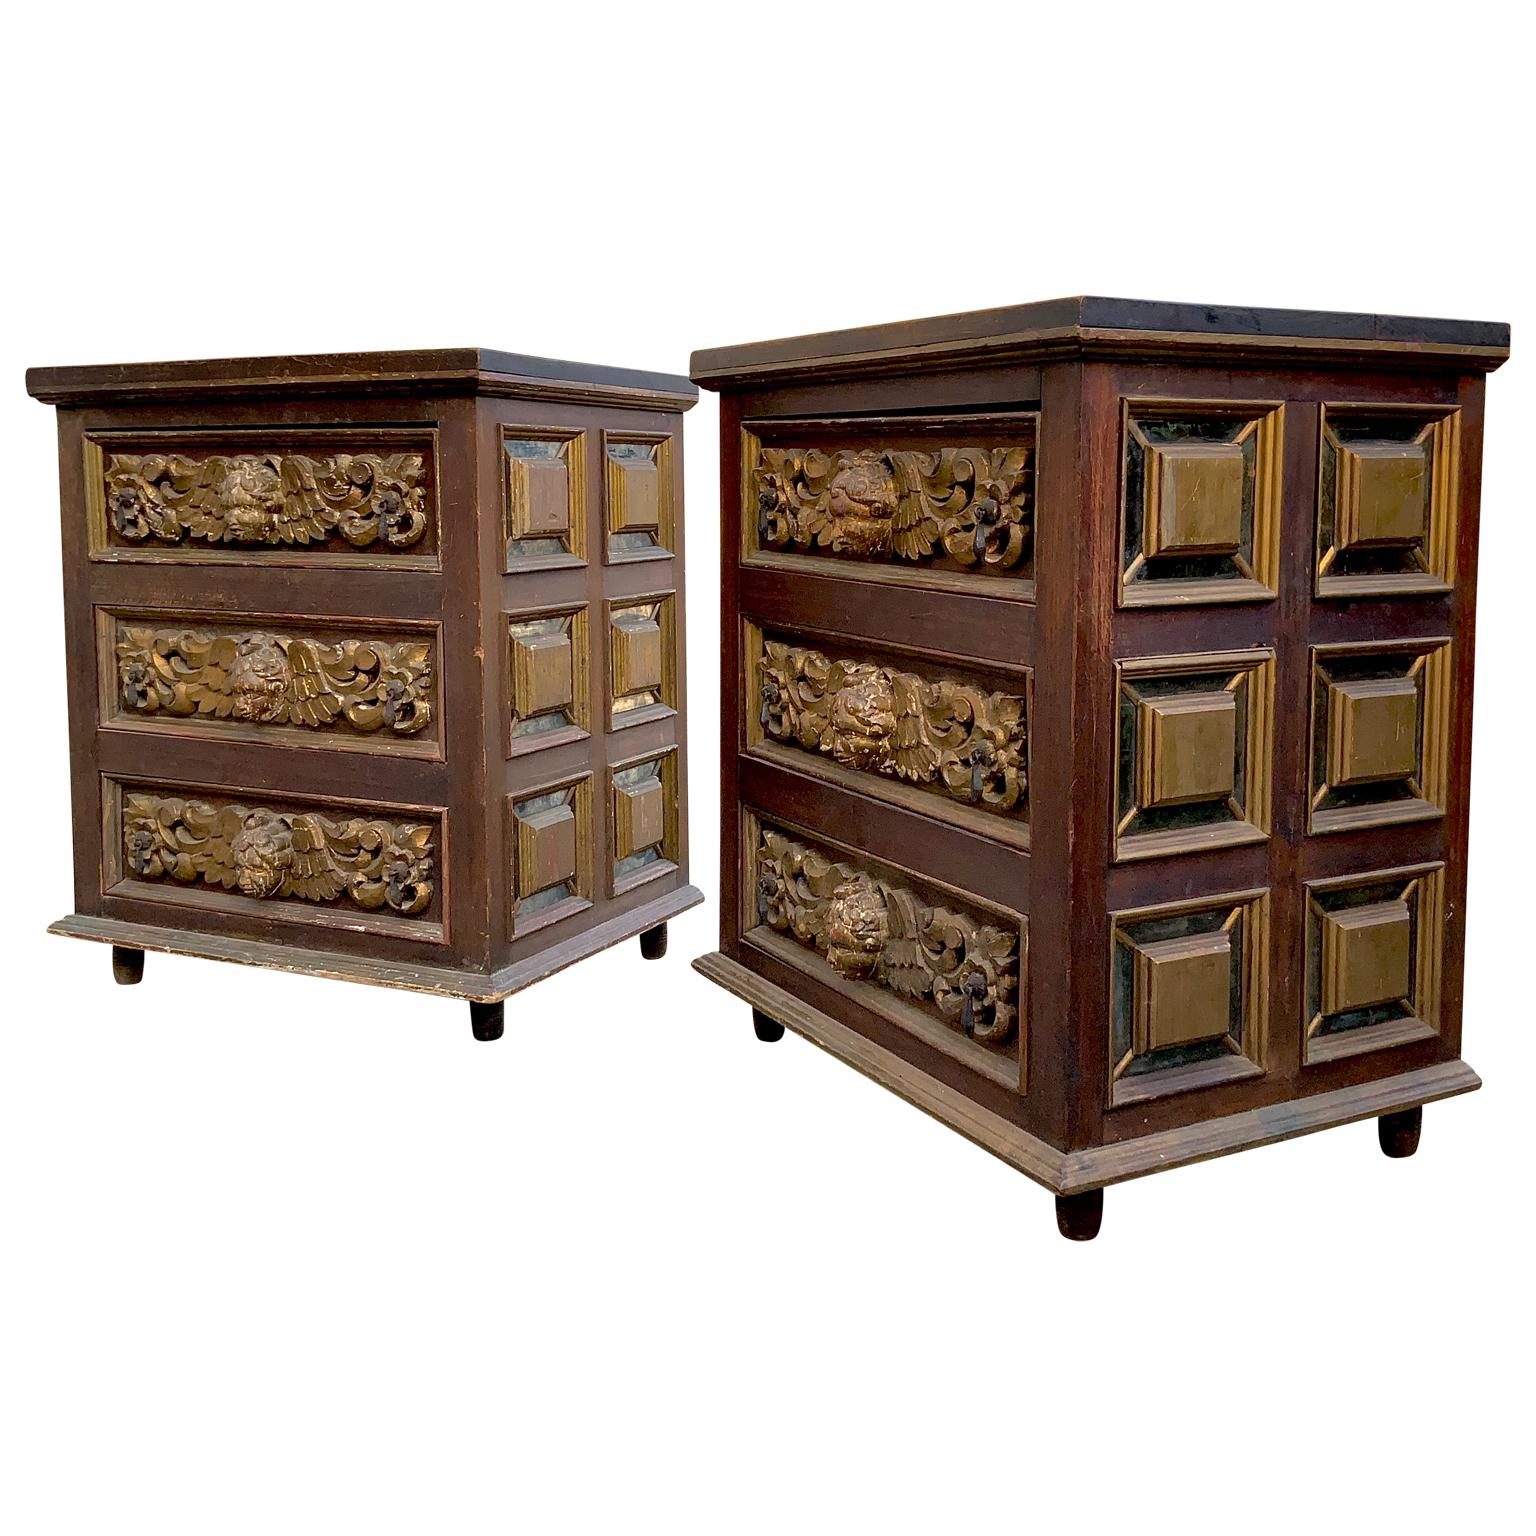 A beautiful pair of Artes De Mexico handcrafted nightstands / cabinets. Gorgeous workmanship in this pair of nightstands. 3 drawers in each with iron pulls. All carved wood with old mirror like accents to the panels on the sides. Carved and gilded